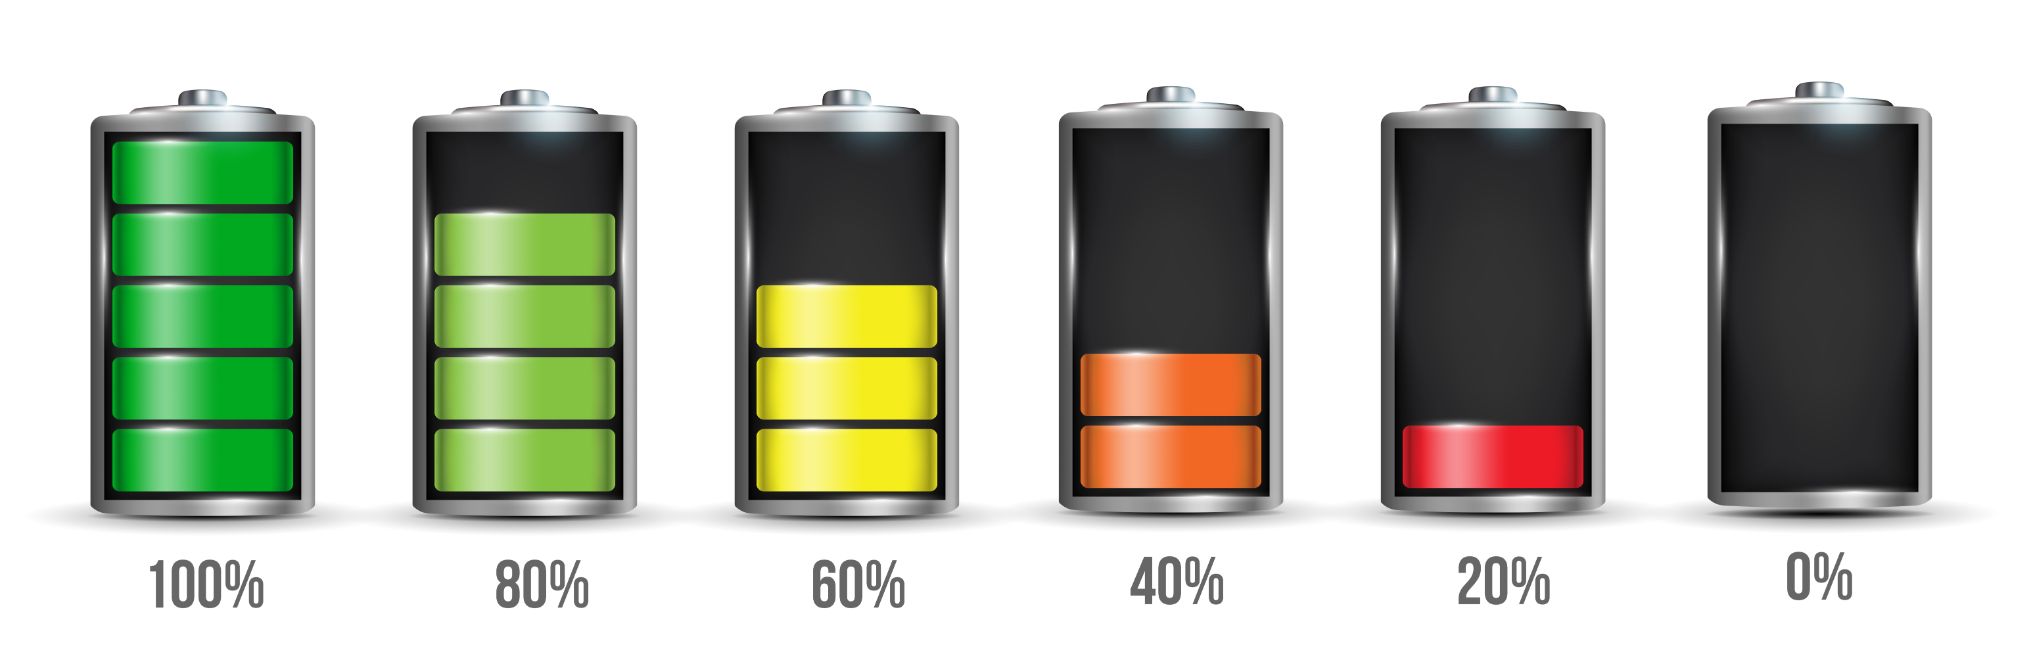 battery with different power levels